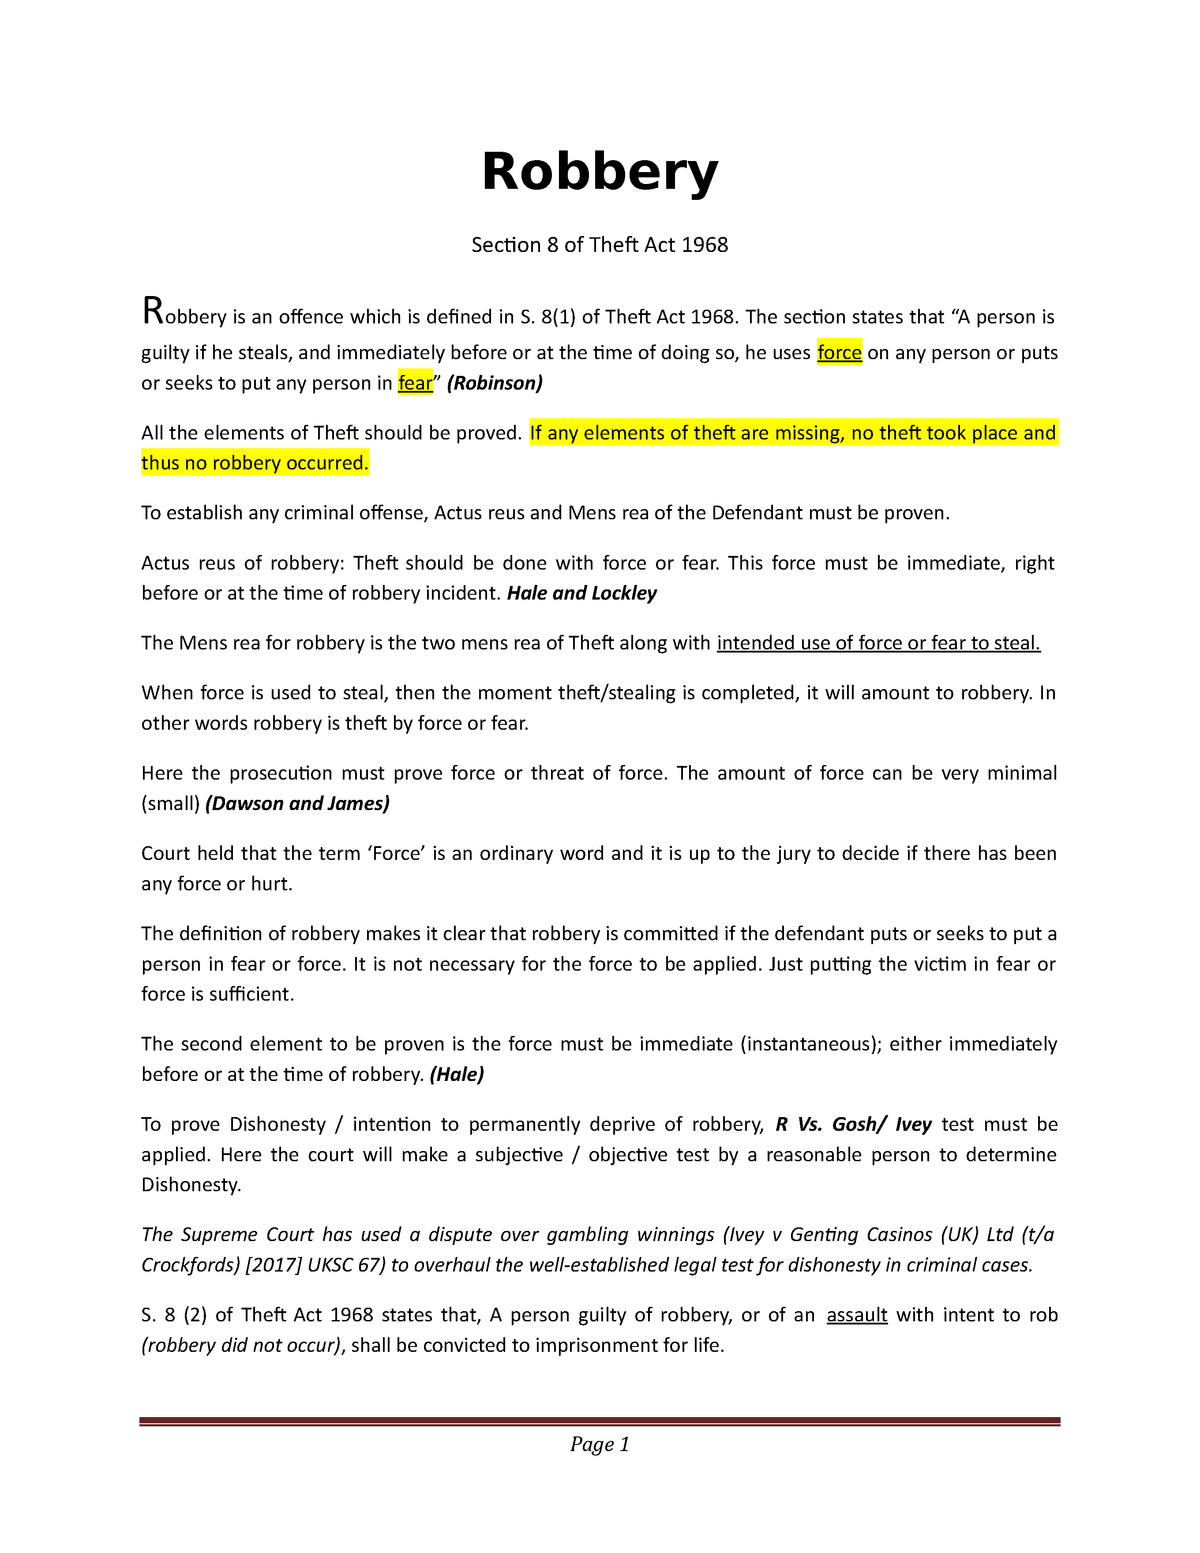 essay about bank robbery